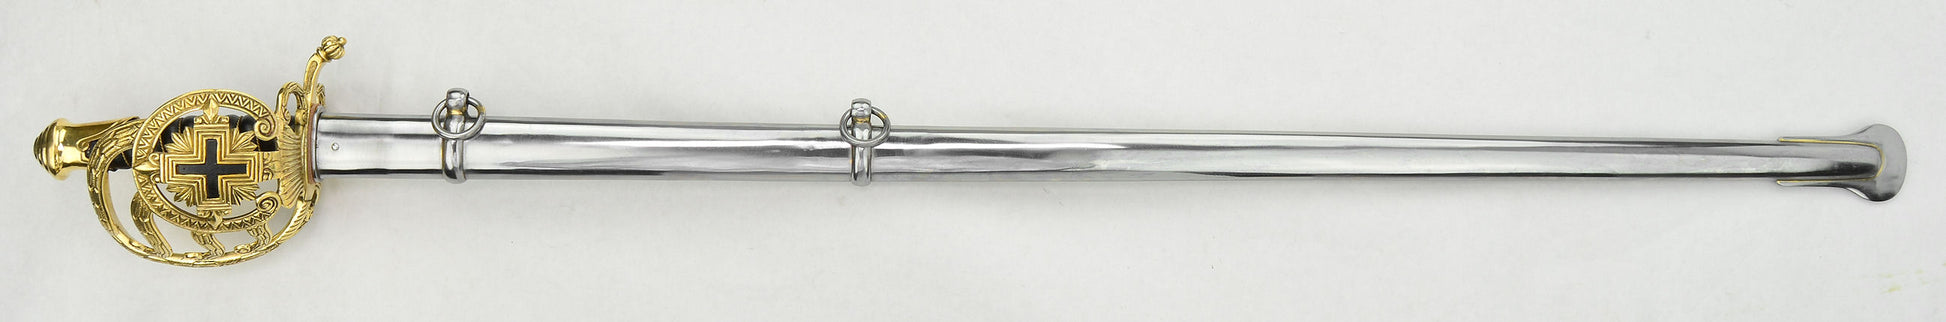 French Musketeer Company Cavalry Sword